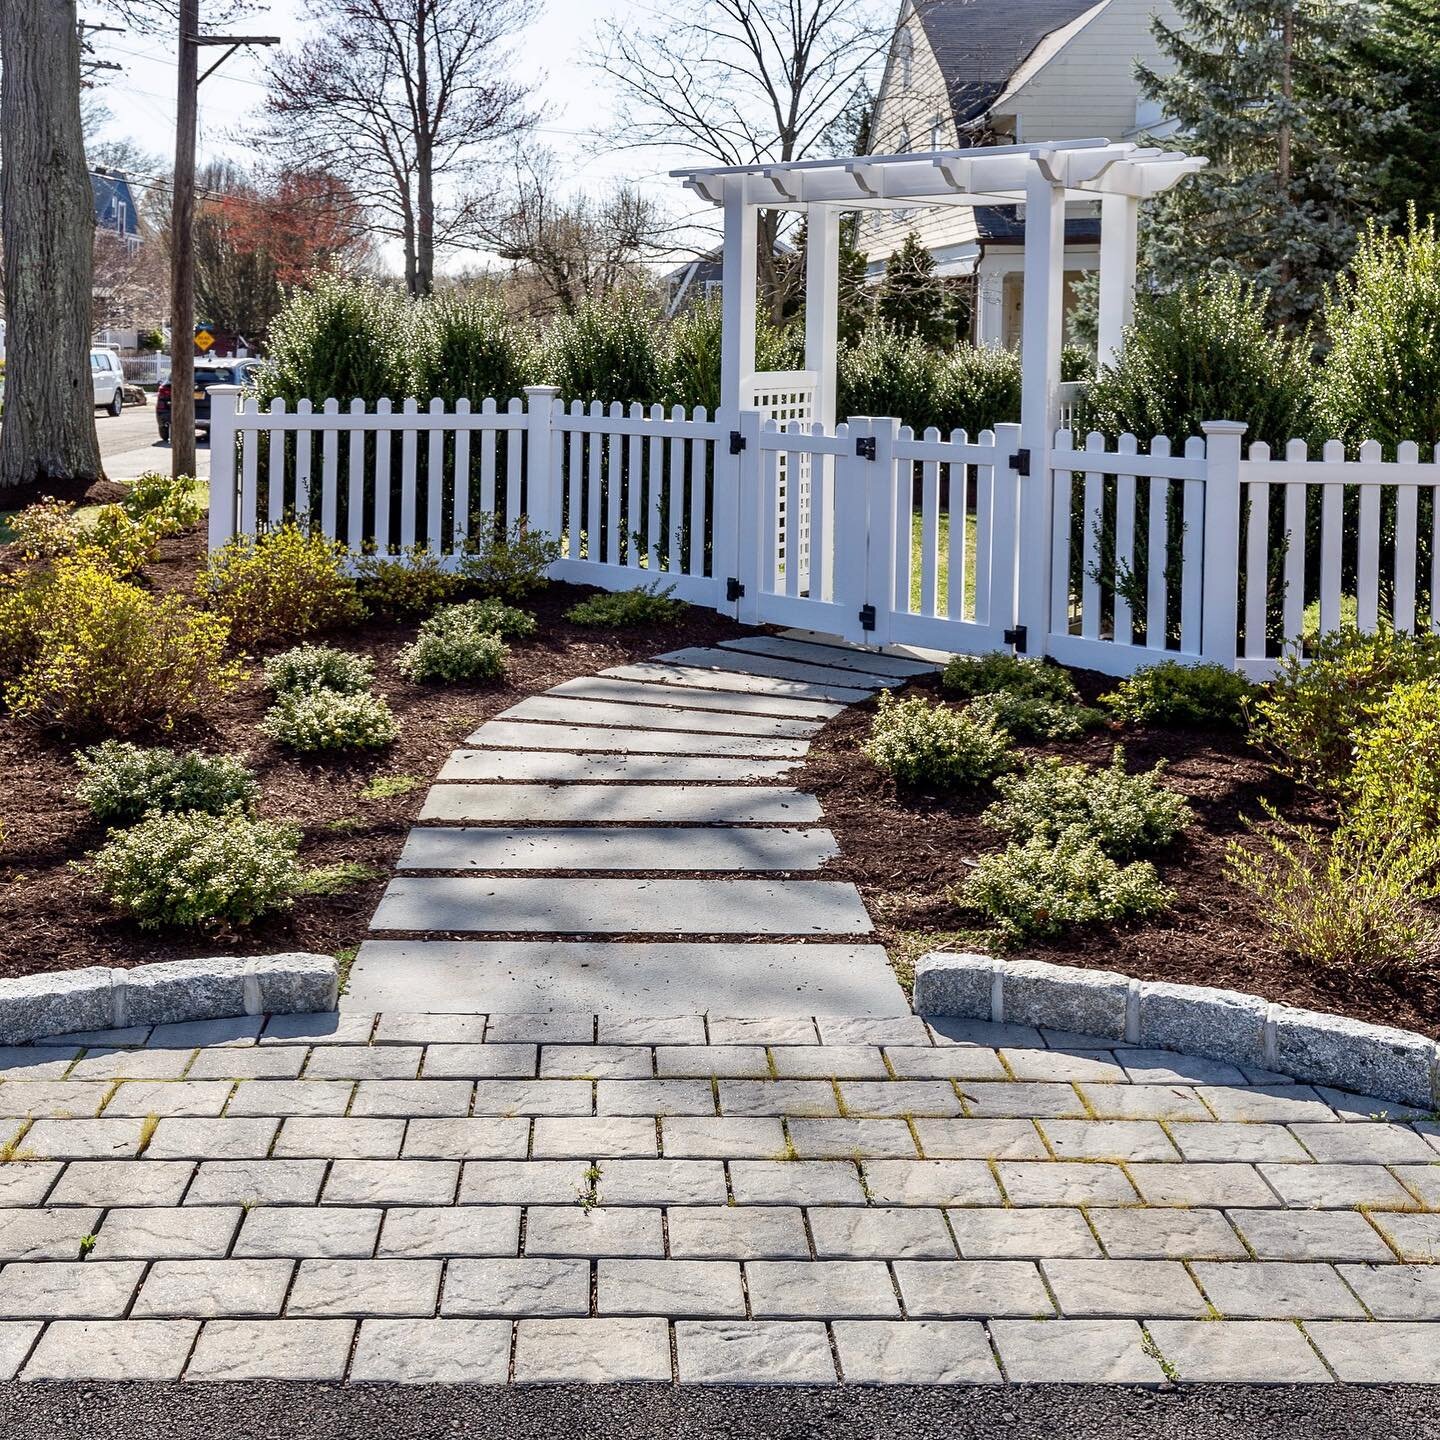 We love this transition from the driveway to the arbor entrance of the yard. Custom cut bluestone makes for a fun and elegant pathway! #path #walkway #landscapedesign #arbor #spring2021 #larchmont #larchmontny #homedesign #home #landscapingideas